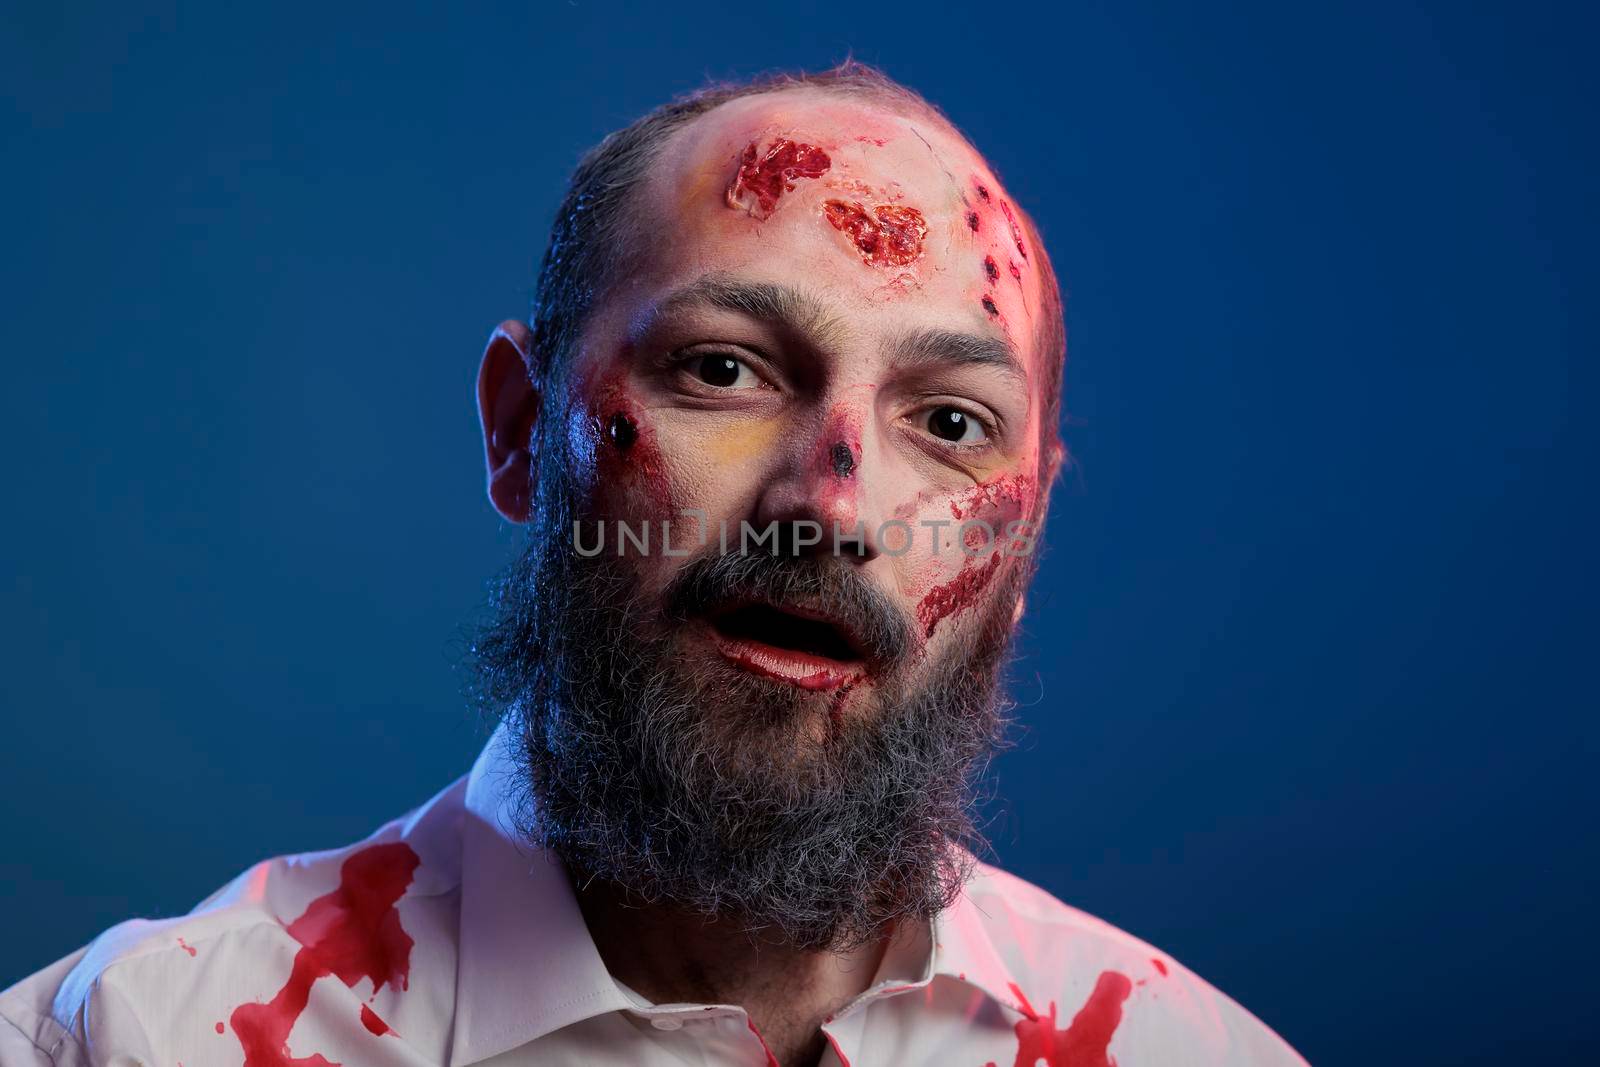 Portrait of undead scary zombie man posing with bloody scars and spooky halloween costume looking dangerous and apocalyptic. Horror aggressive deadly monster corpse eating brain.